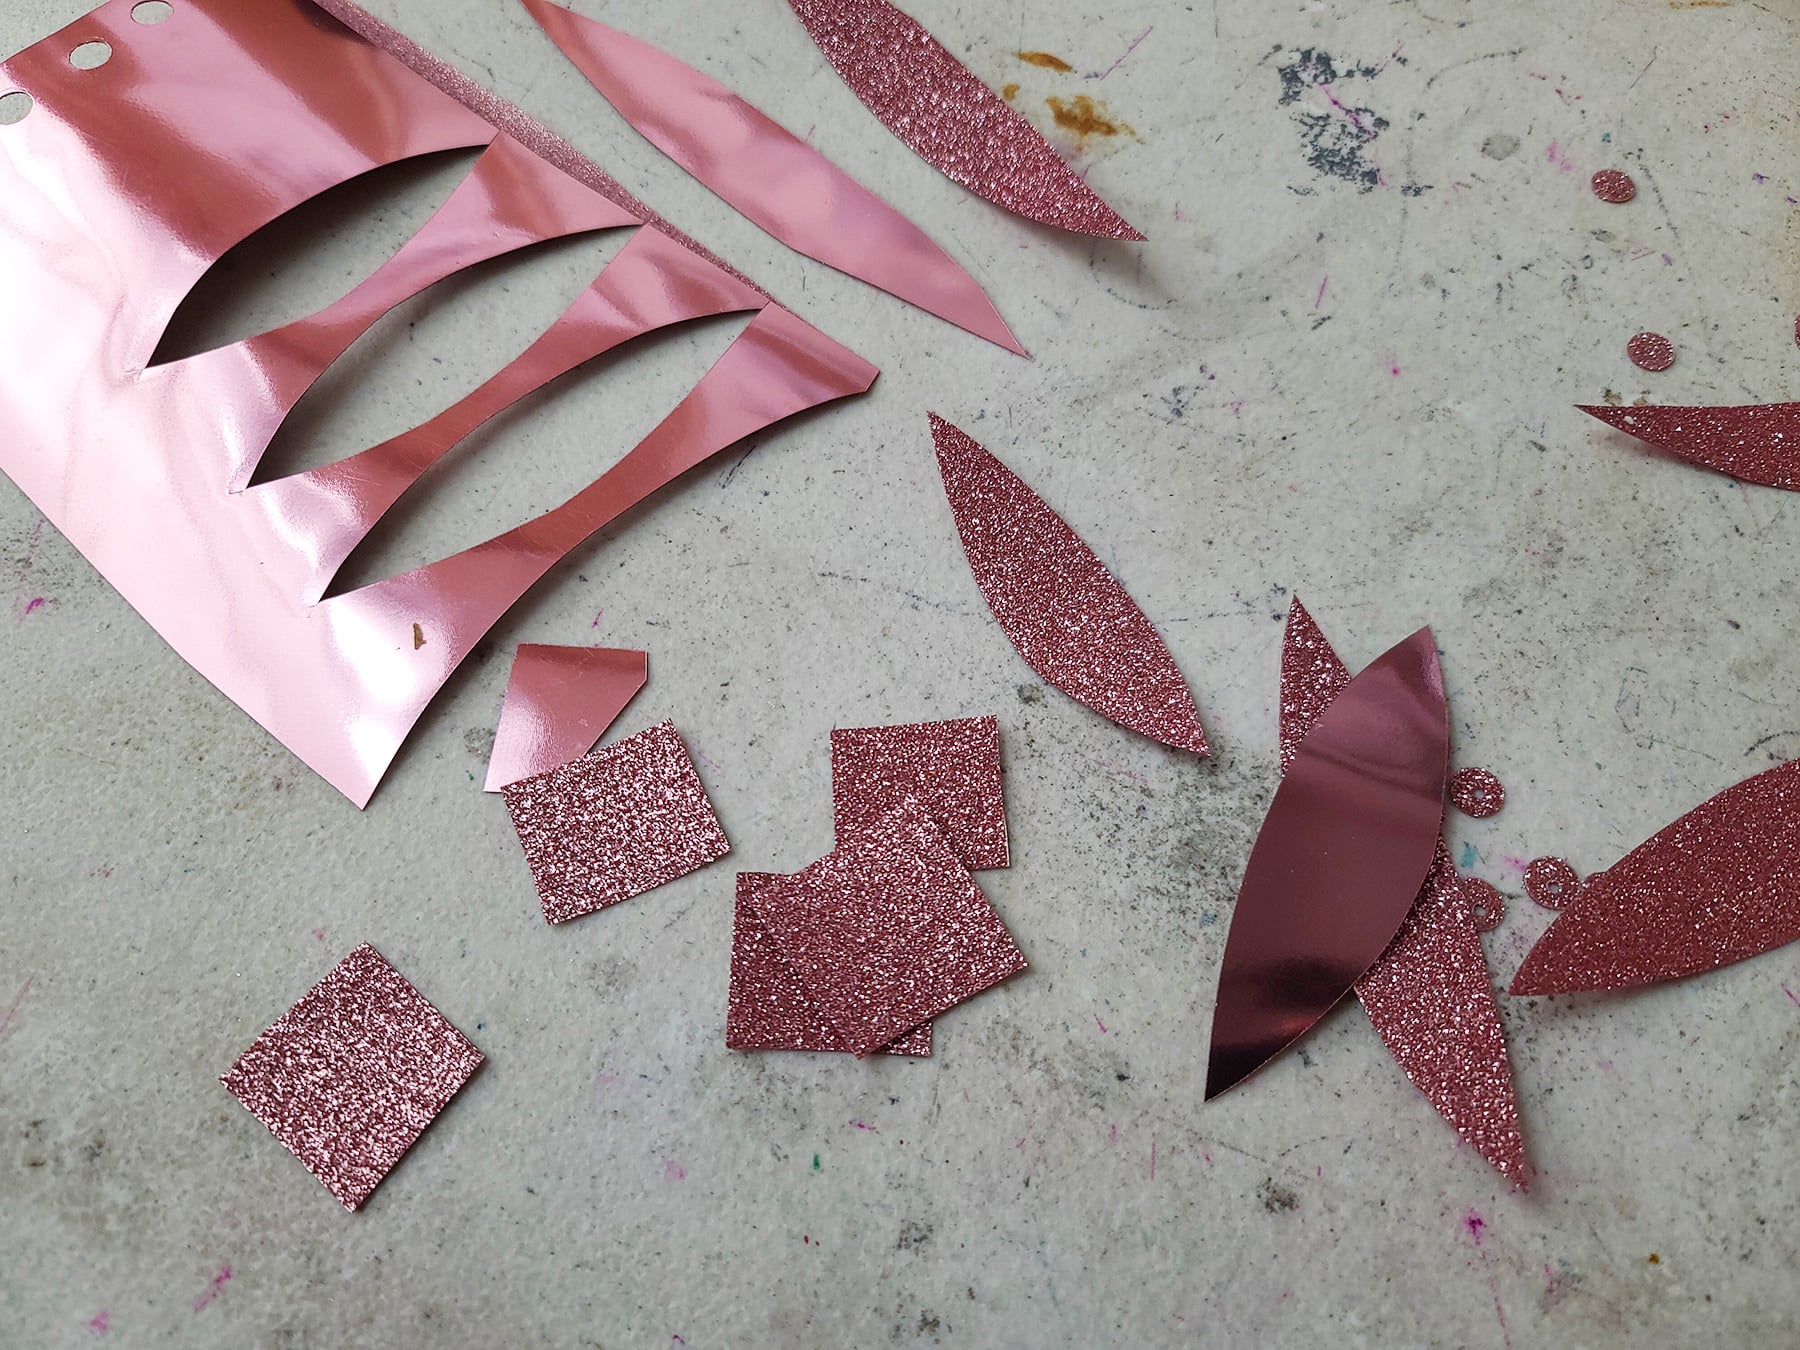 A piece of metallic pink heat transfer vinyl with lead and square shapes cut out of it.